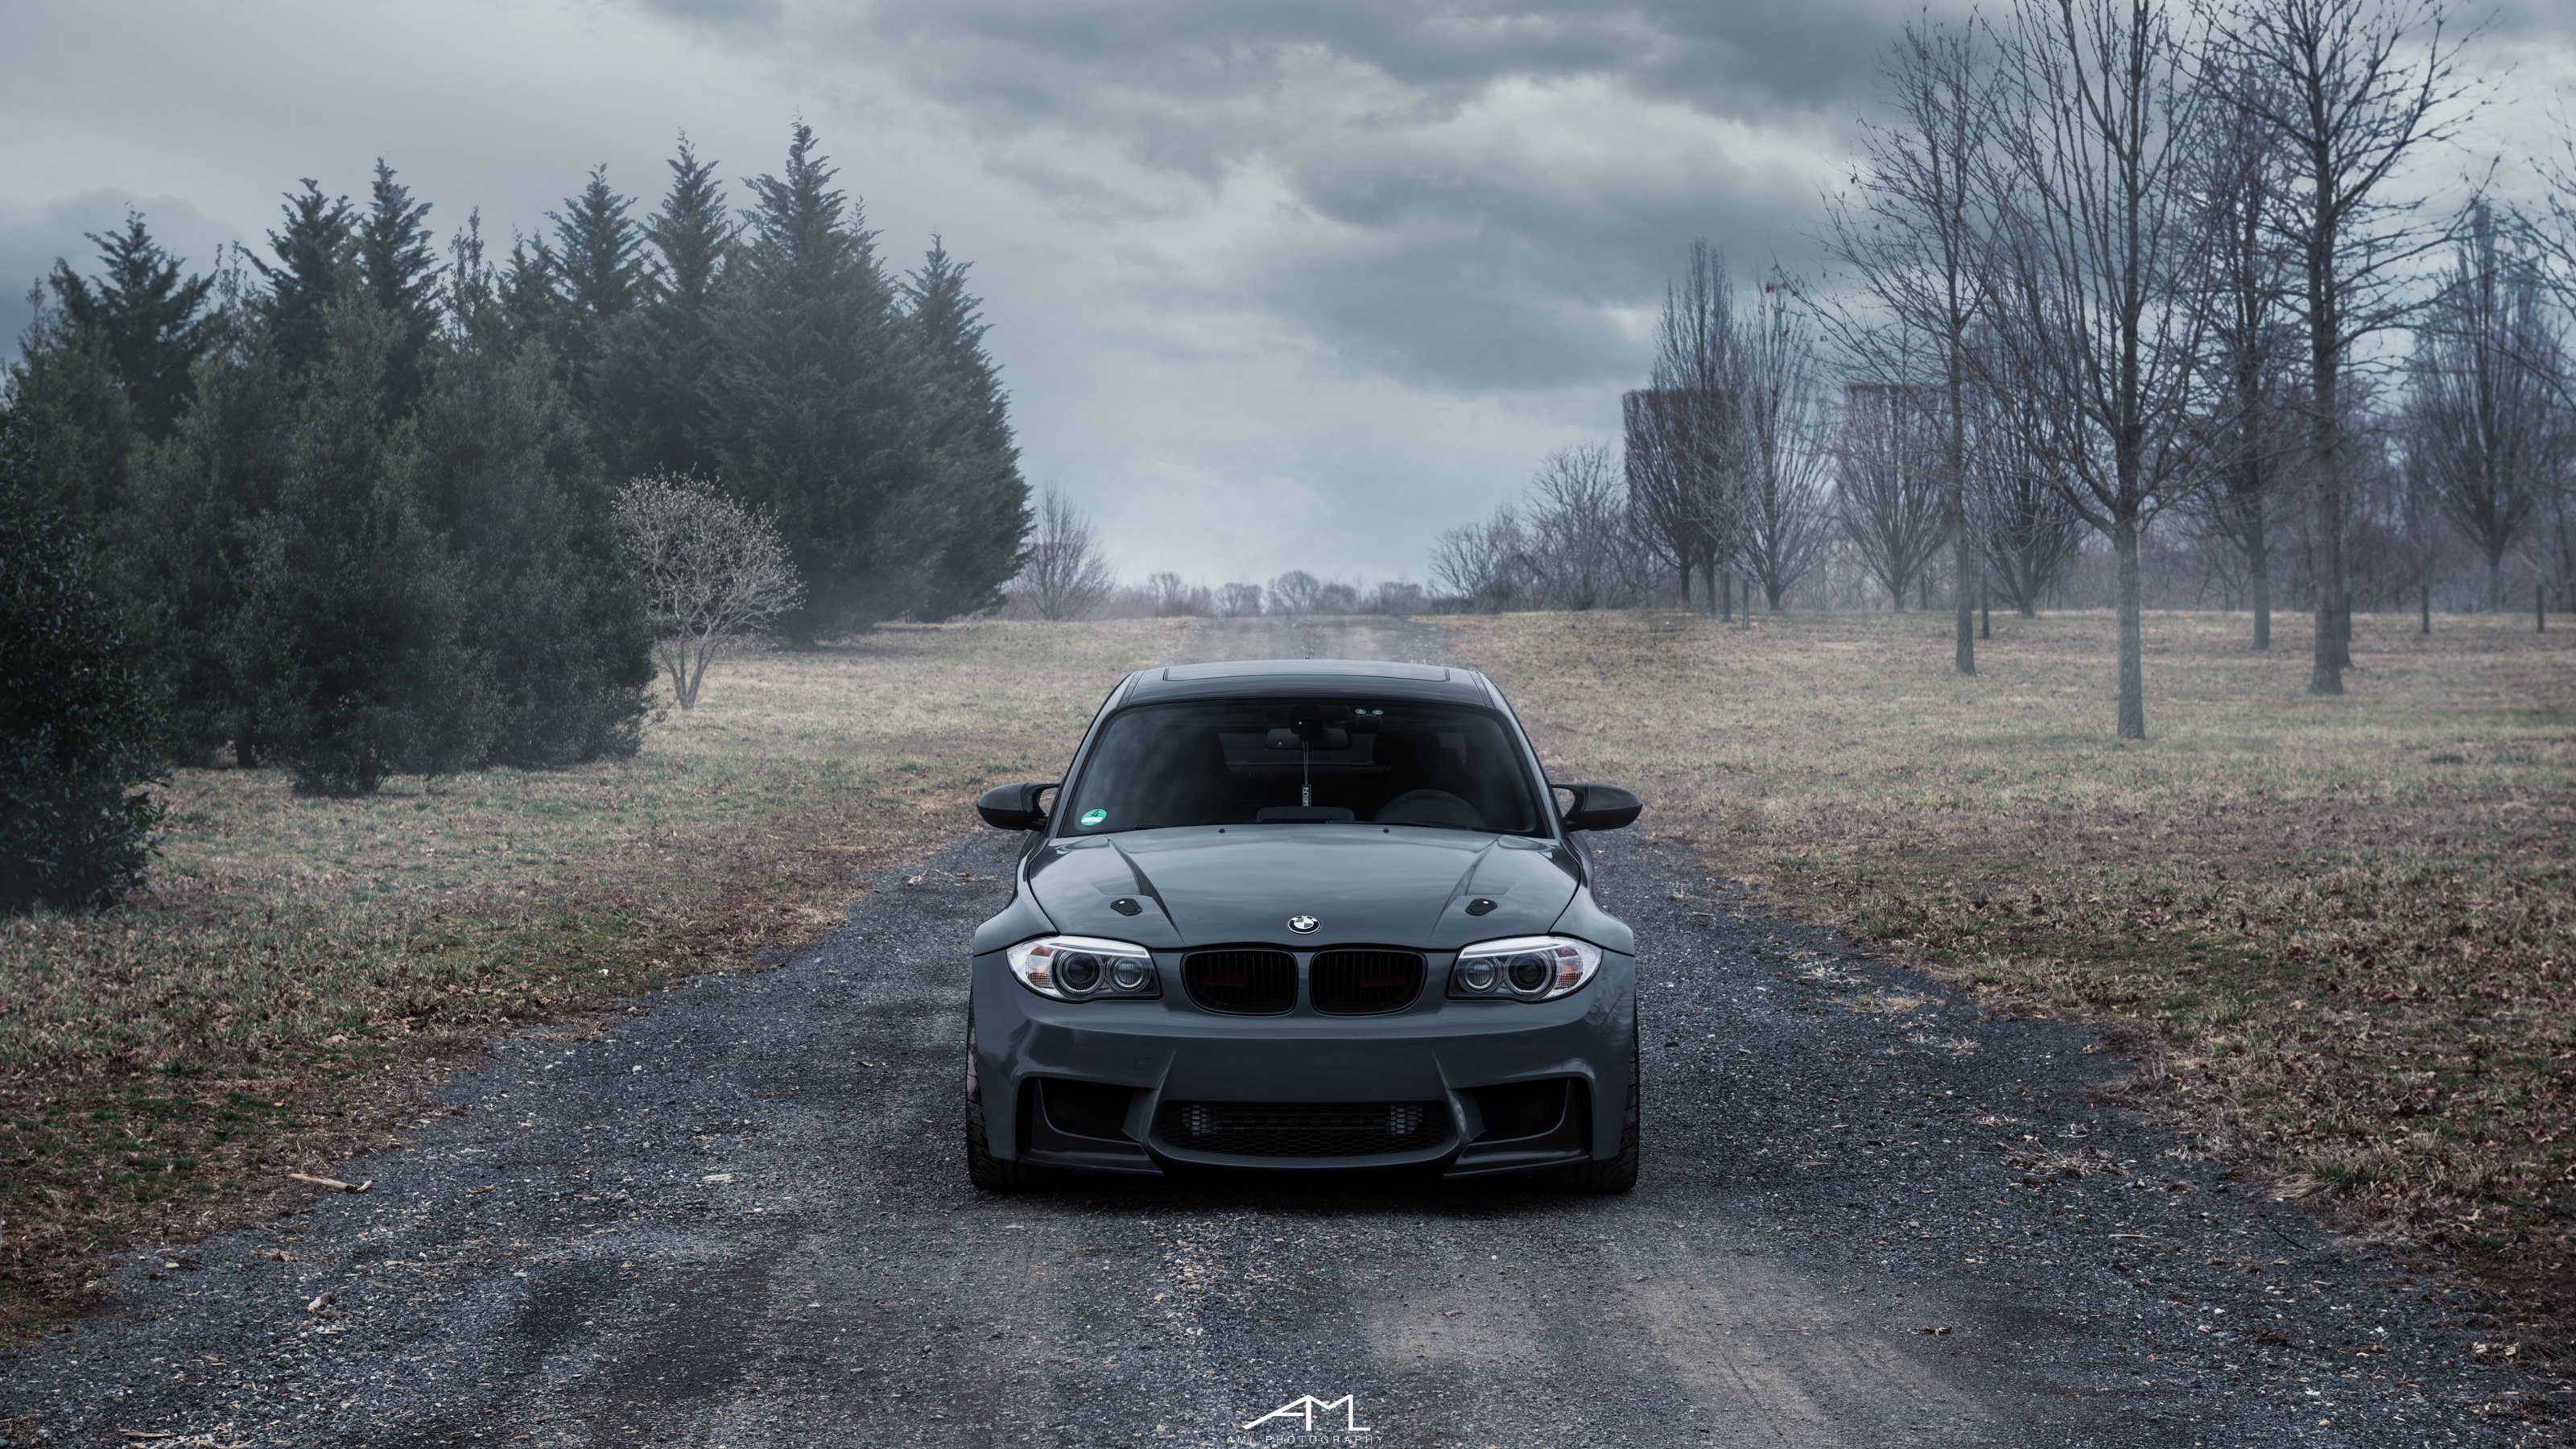 Gray BMW 1-Series with Custom Front Bumper - Photo by Arlen Liverman